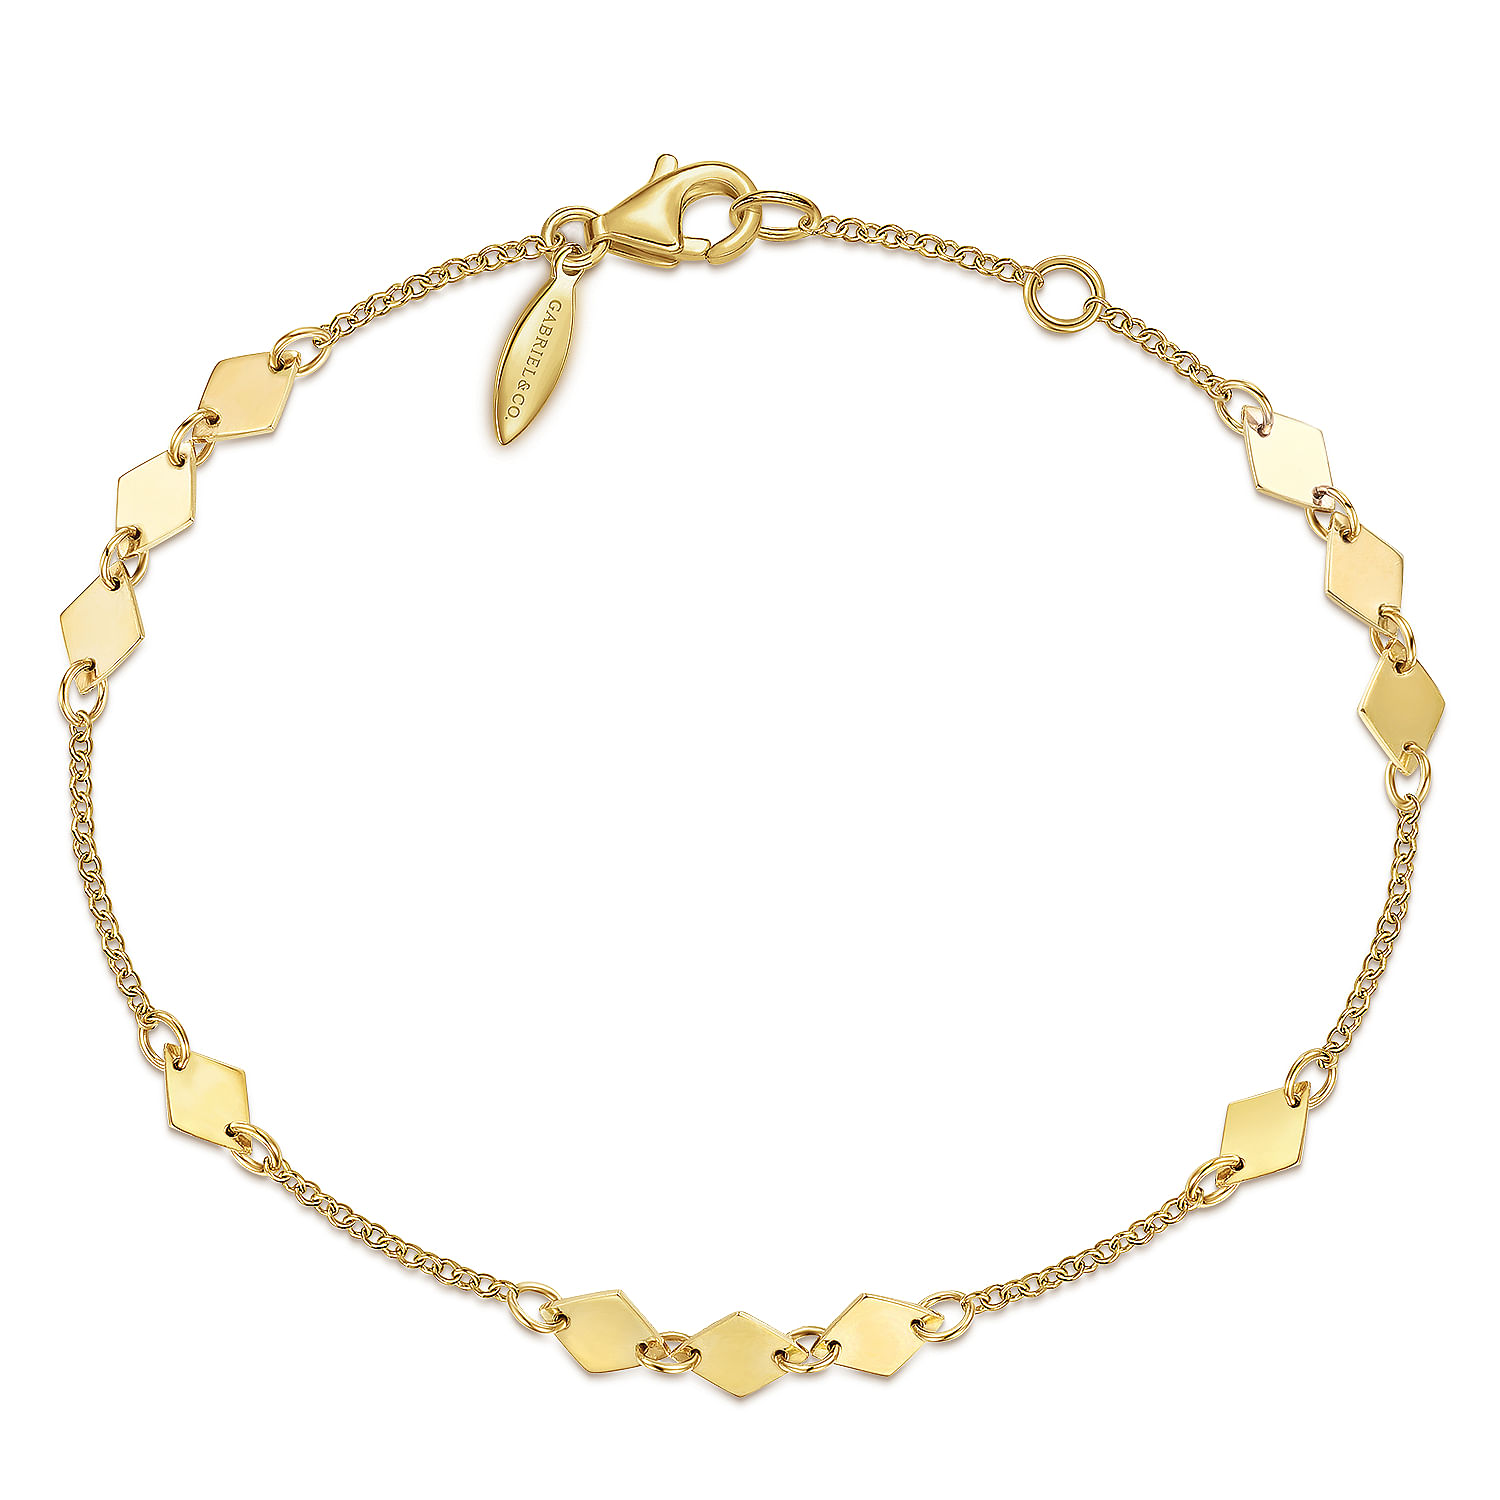 14K Yellow Gold Chain Bracelet with Flat Rhombus Stations